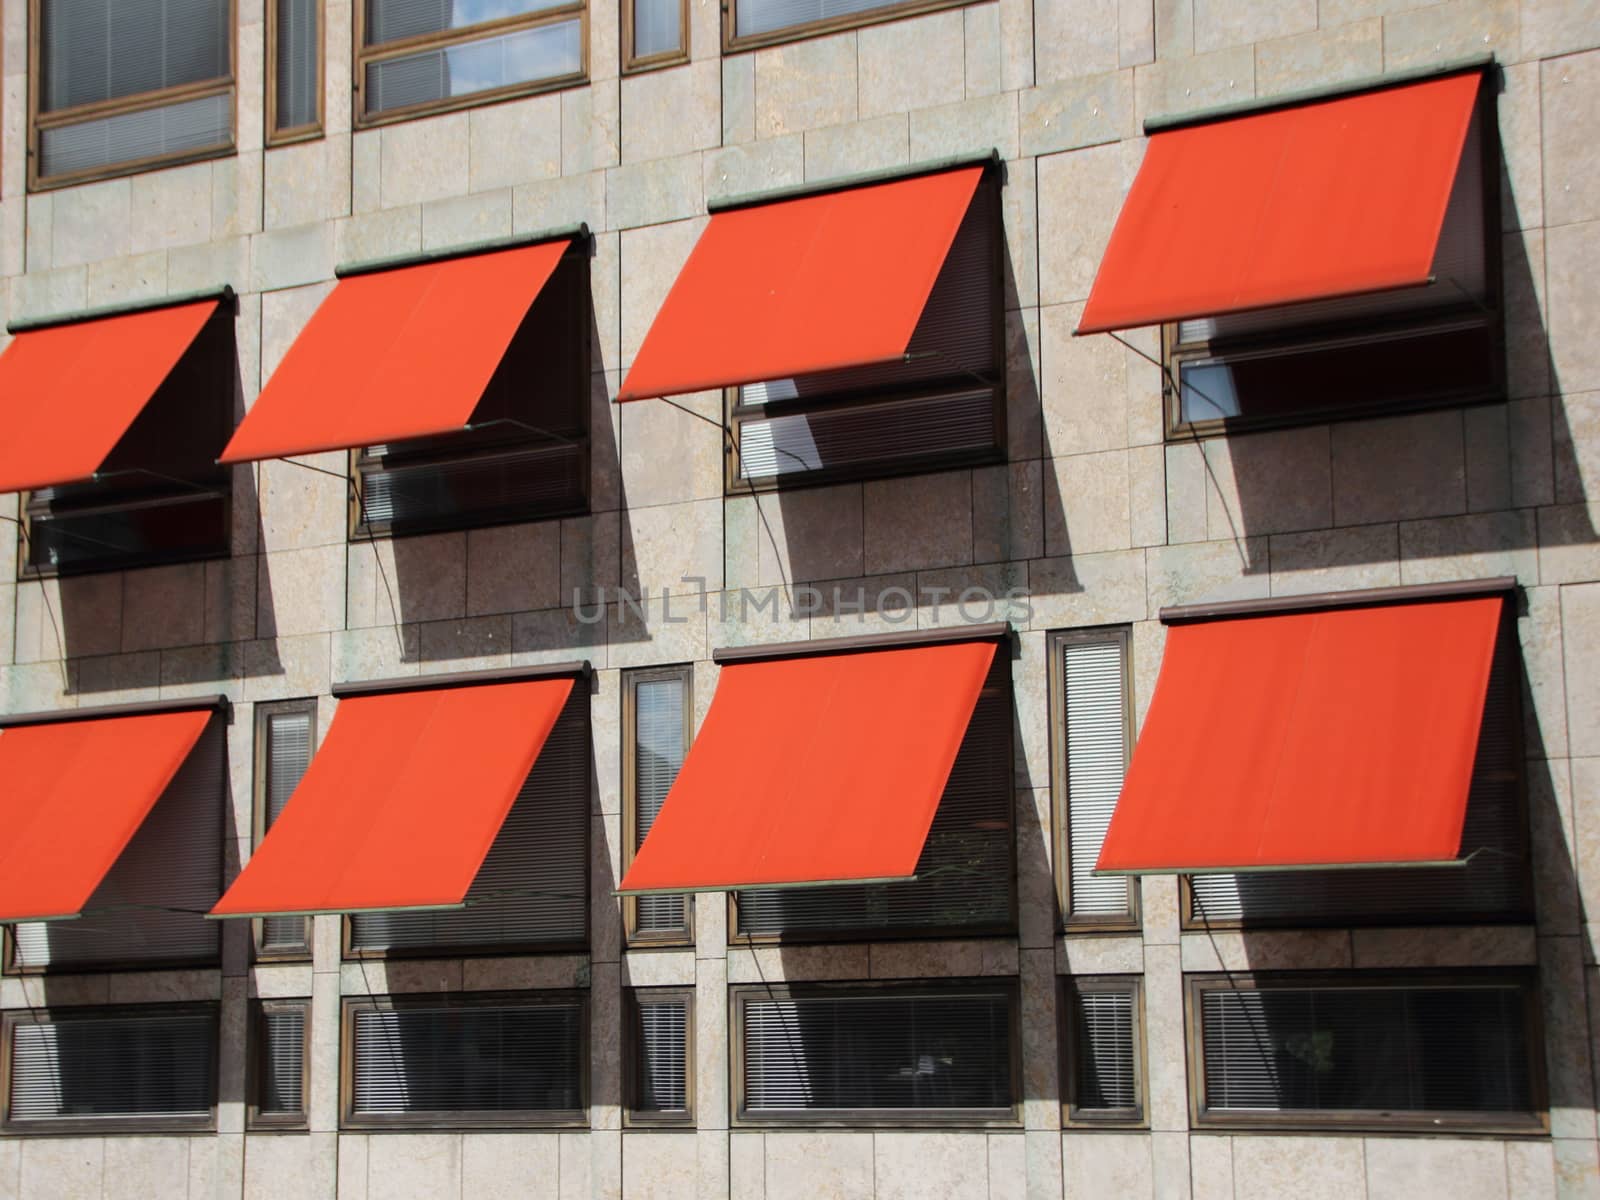 Red Overhang Sunshade Awning on Modern Building Facade Protecting from the Sun. Giving cooler indoor climate.